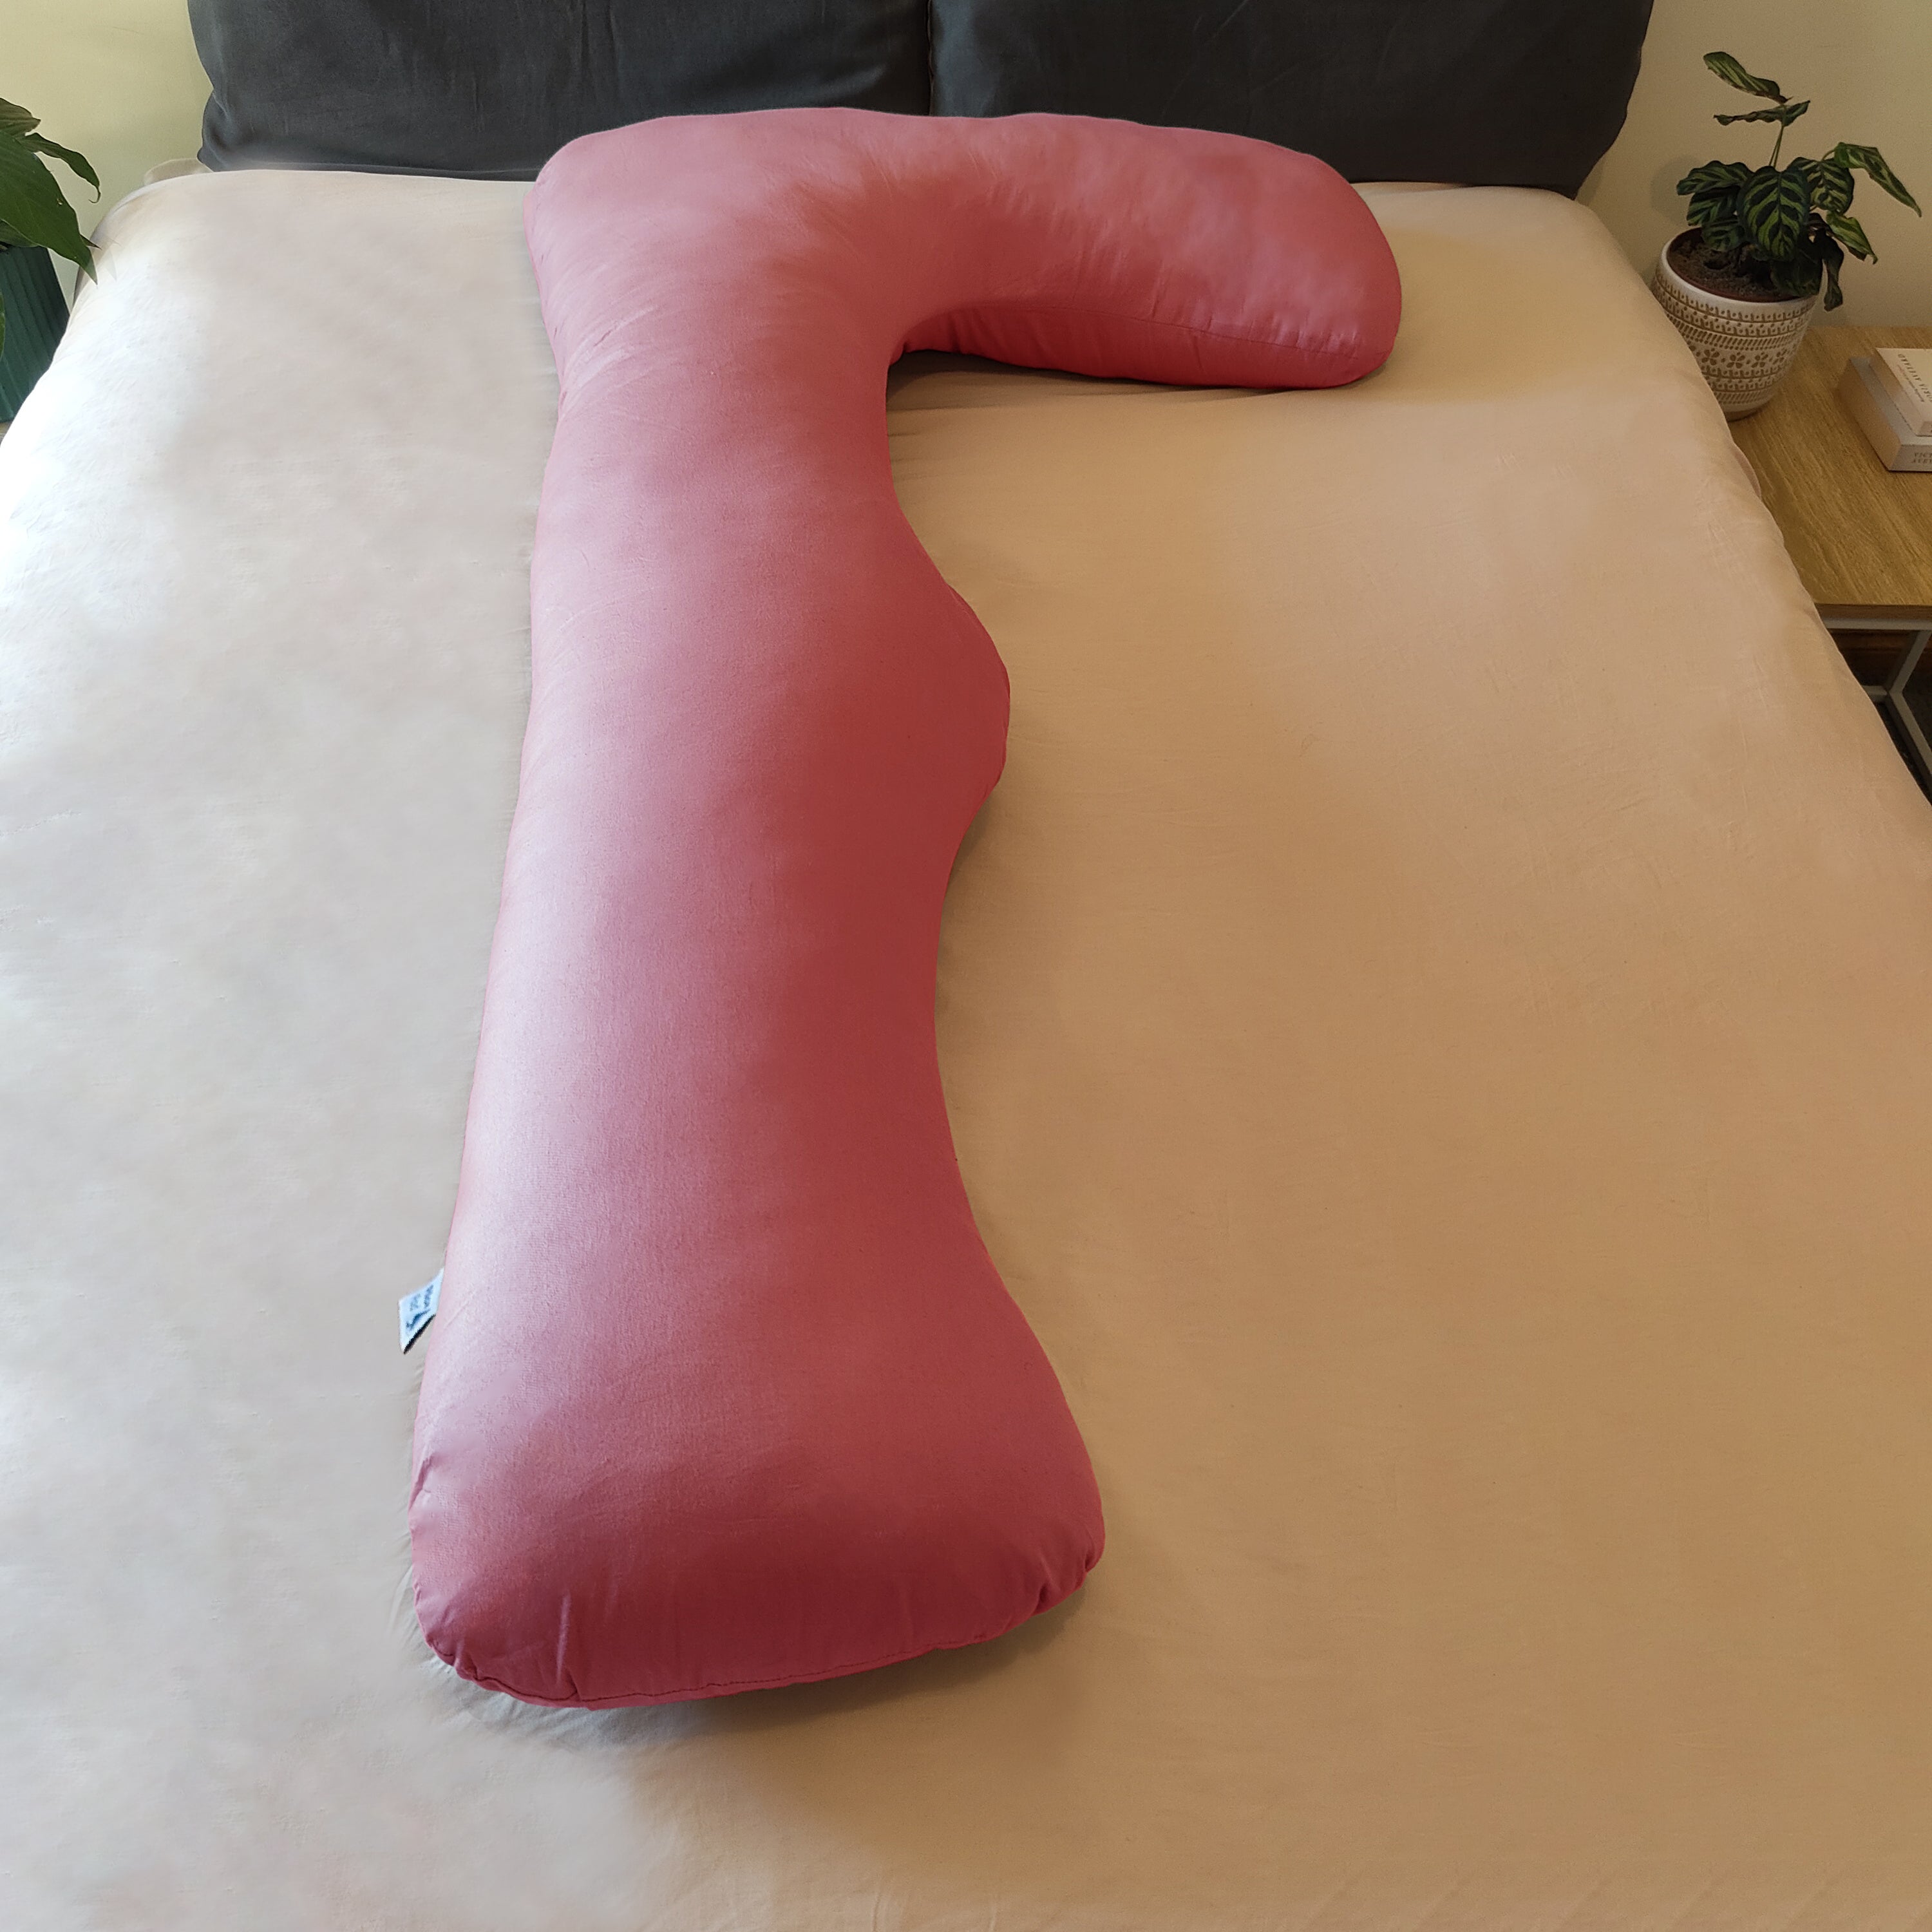 L-Shaped Support Pillow by Pillow Pod